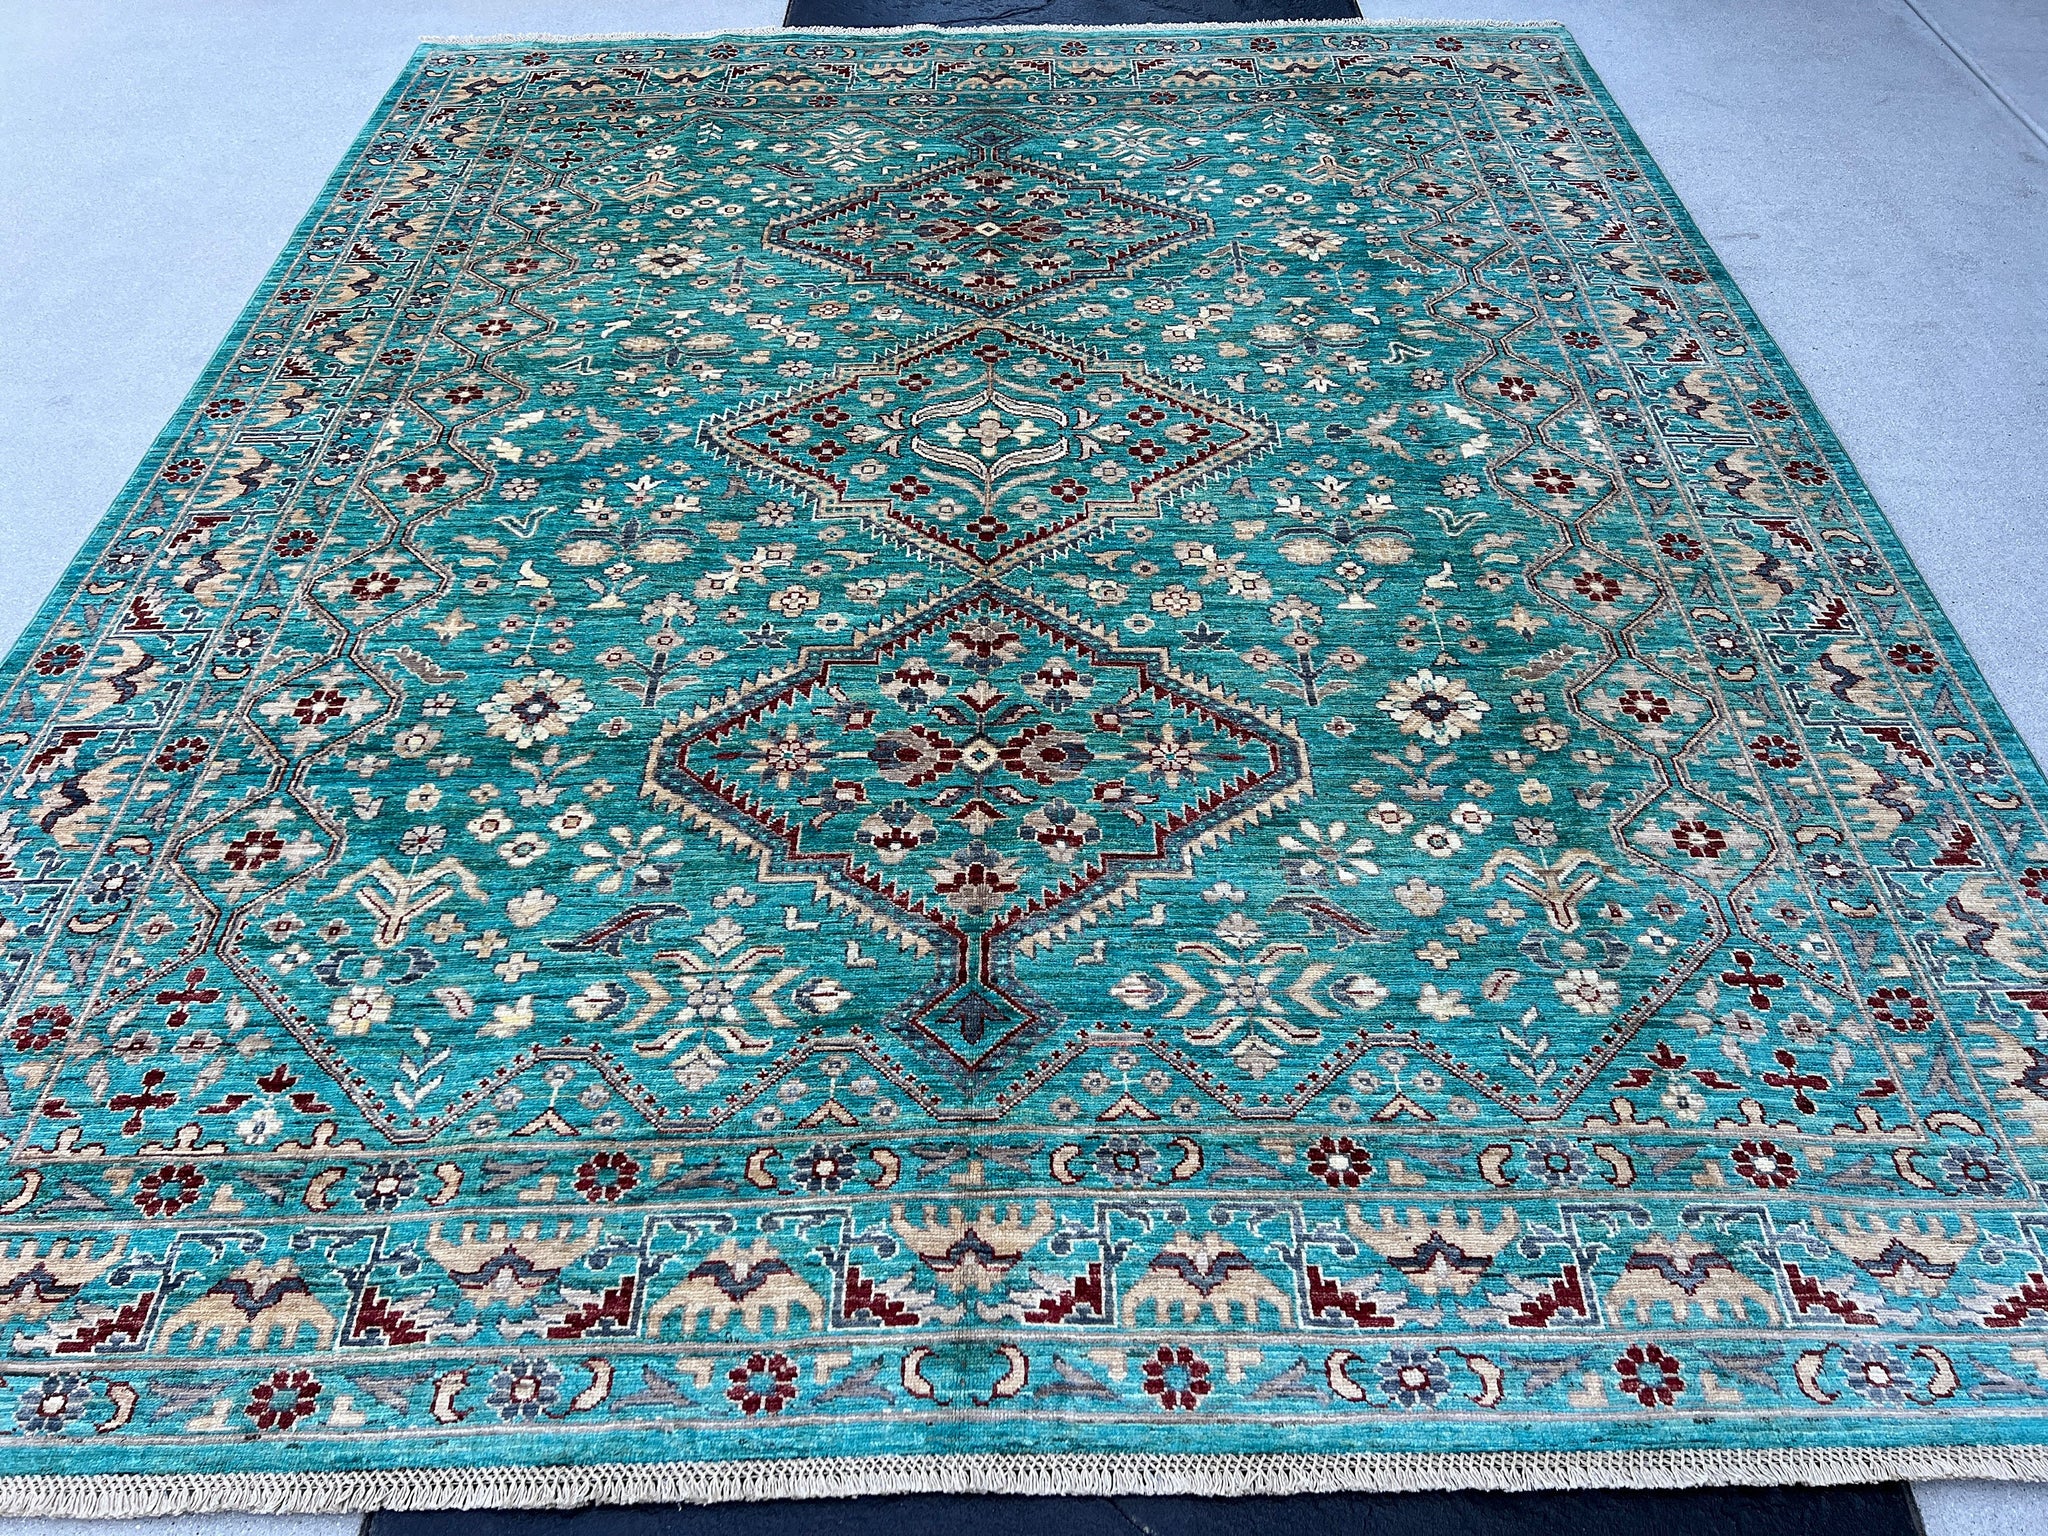 8x10 (240x300) Handmade Afghan Rug | Turquoise Garnet Red Cream Beige Ivory Grey Taupe Chocolate Brown | Hand Knotted Wool Turkish Oushak